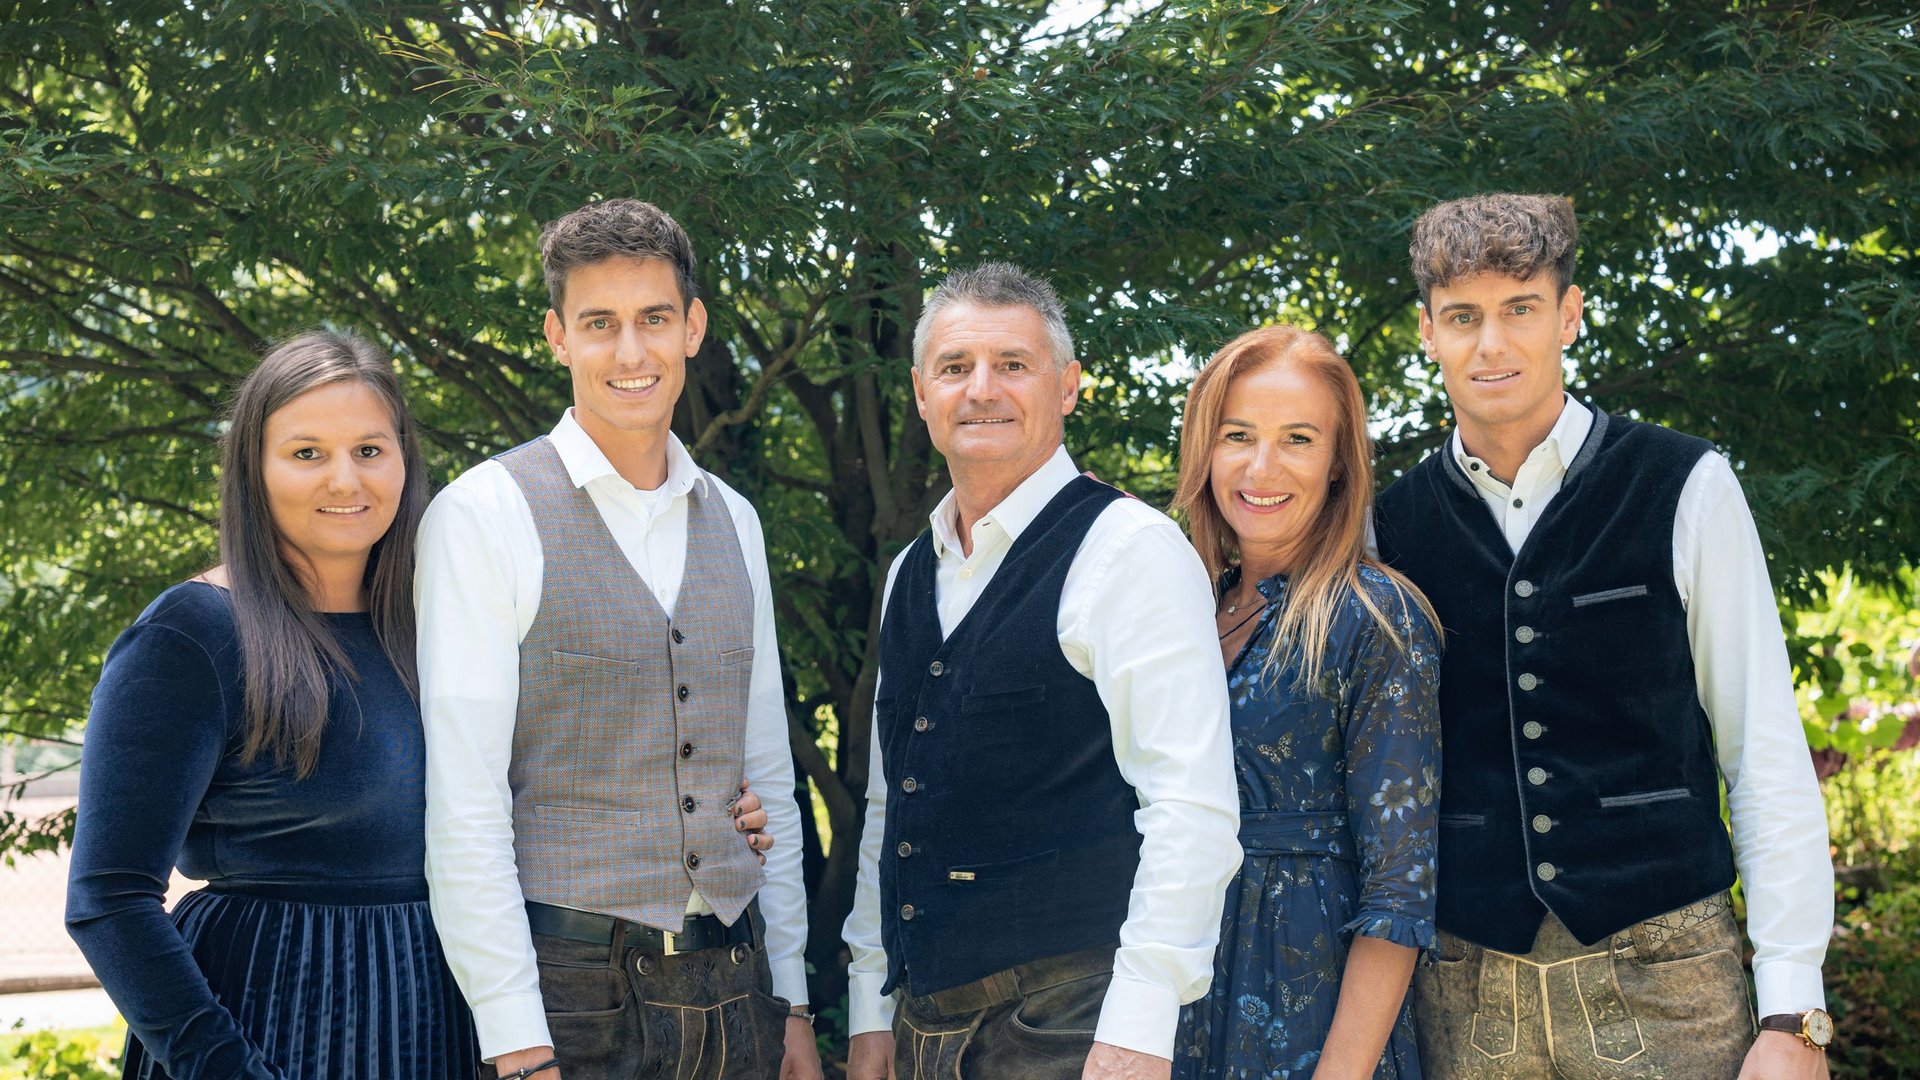 Heinrich Dorfer and his family: your hosts